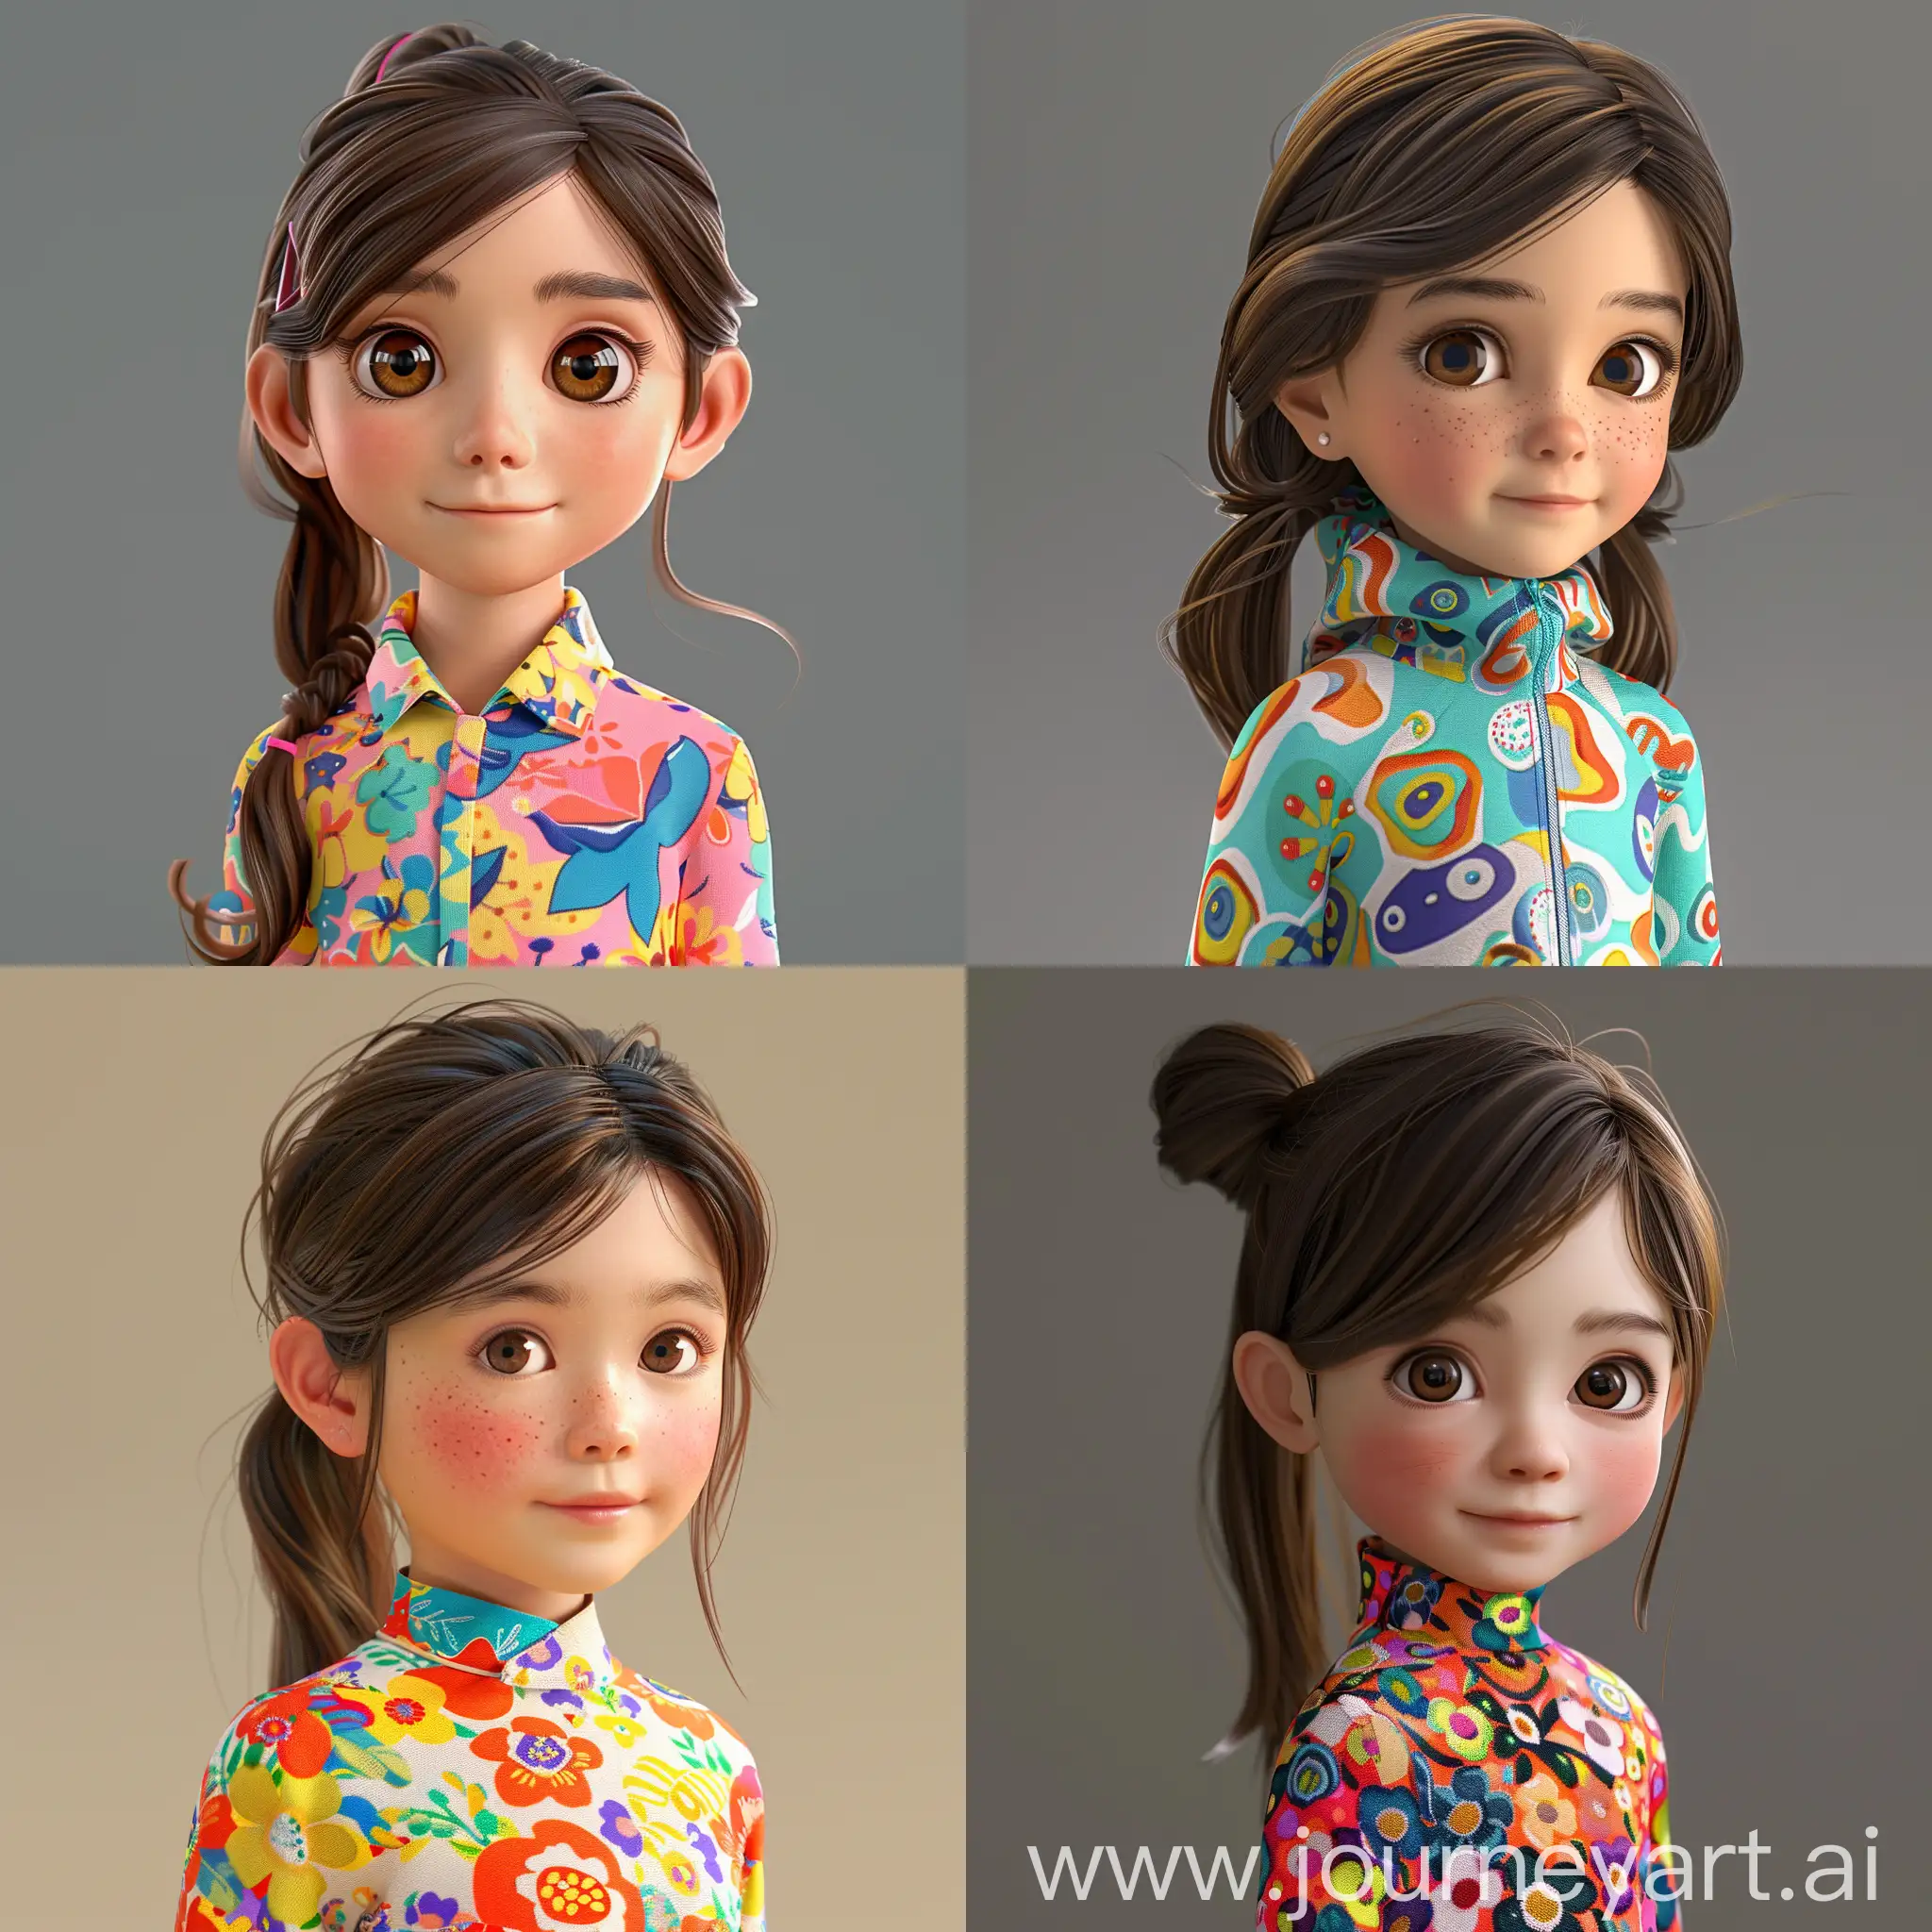 Playful-Multicultural-Girl-in-Colorful-Attire-Animated-3D-Art-in-Pixar-Style